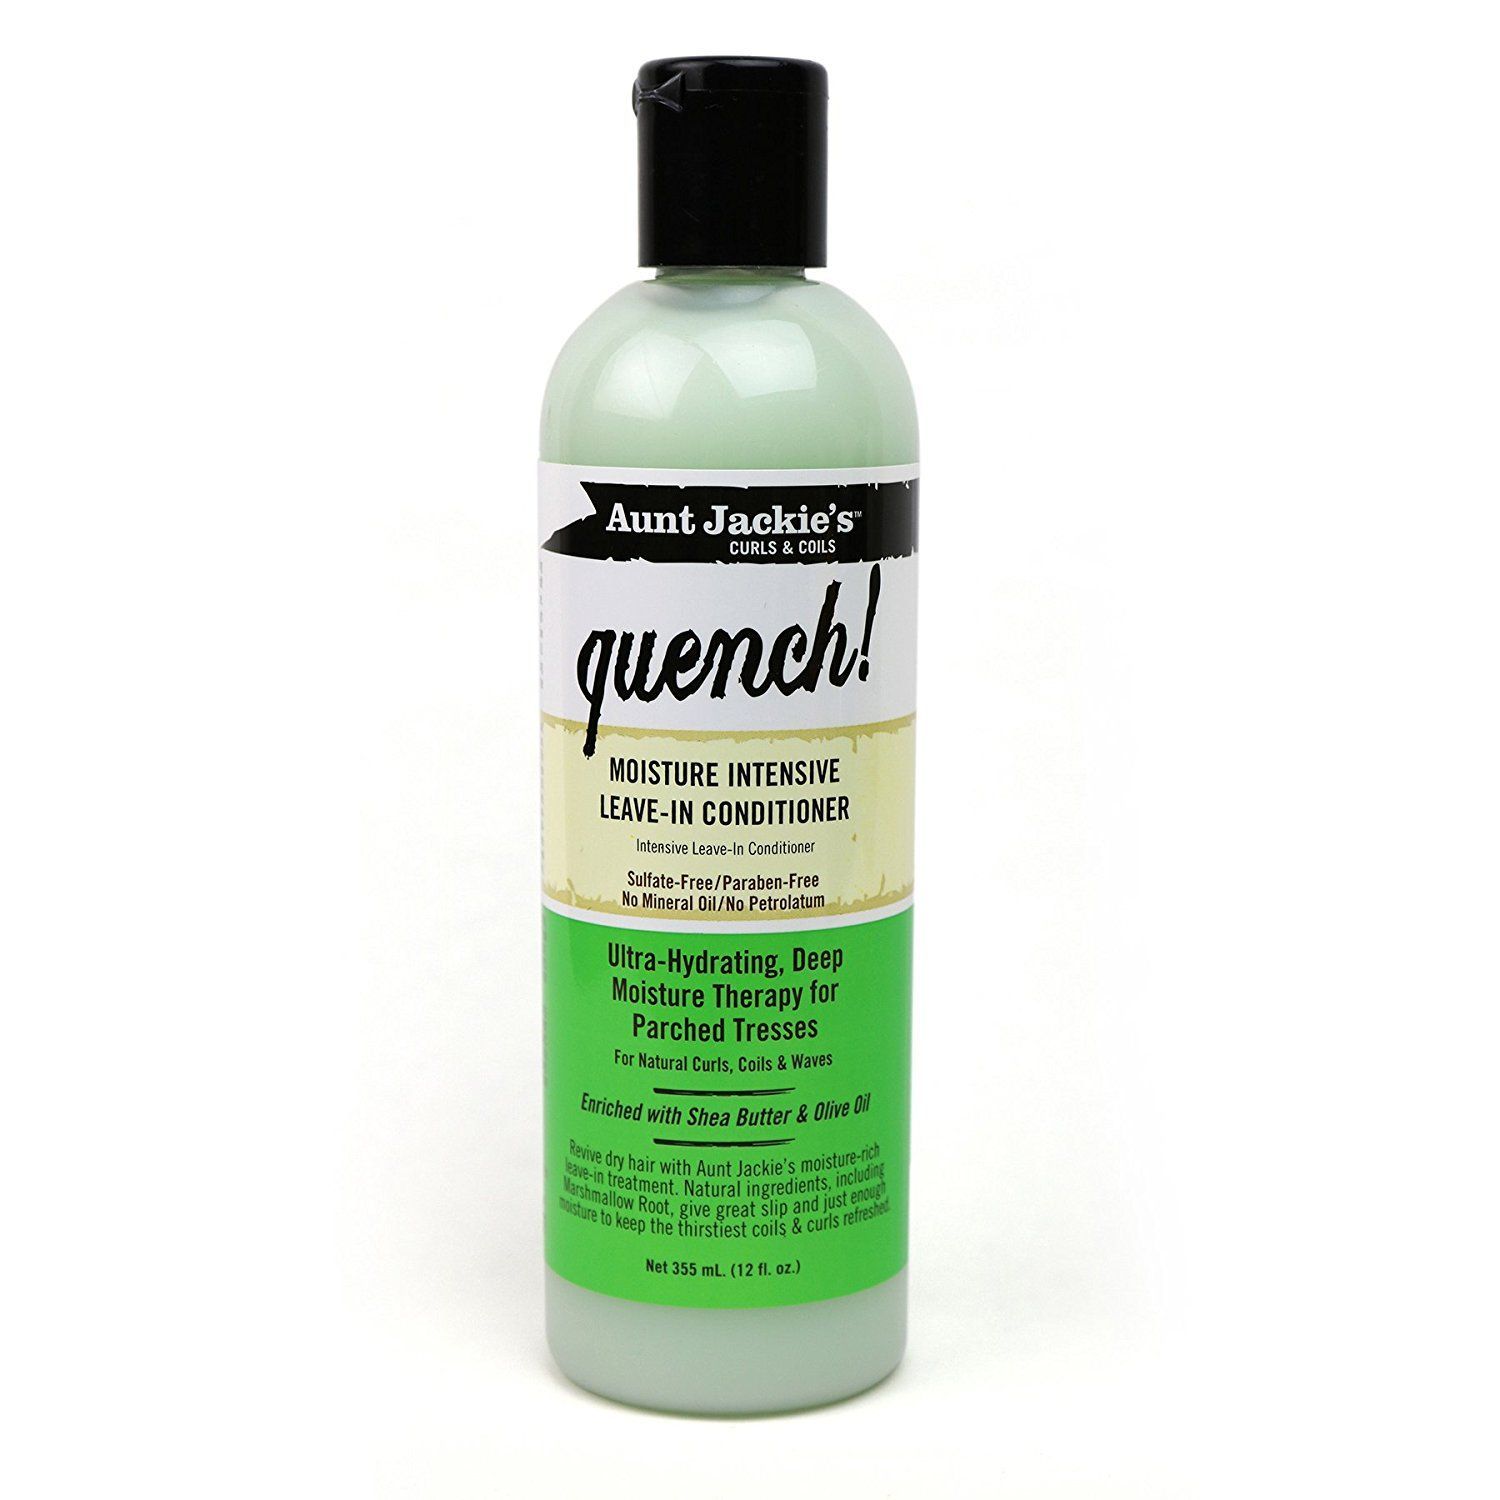 Aunt Jackie's Quench Moisture Intensive Leave-in Conditioner - 12oz